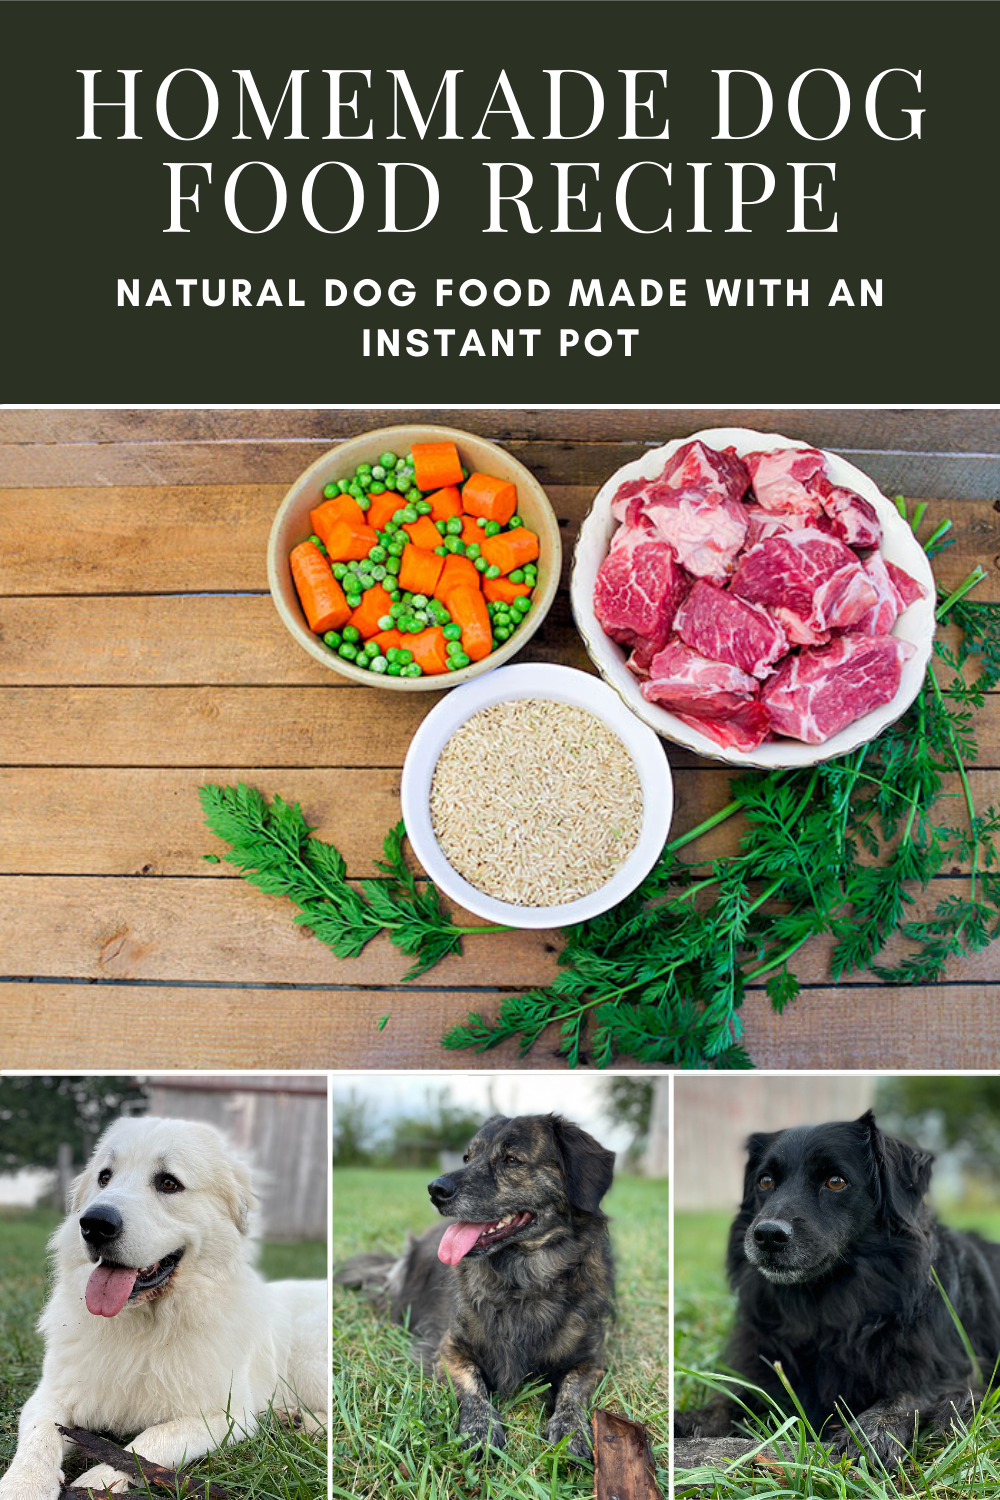 https://wholemadehomestead.com/wp-content/uploads/2021/05/Homemade-Dog-food.png